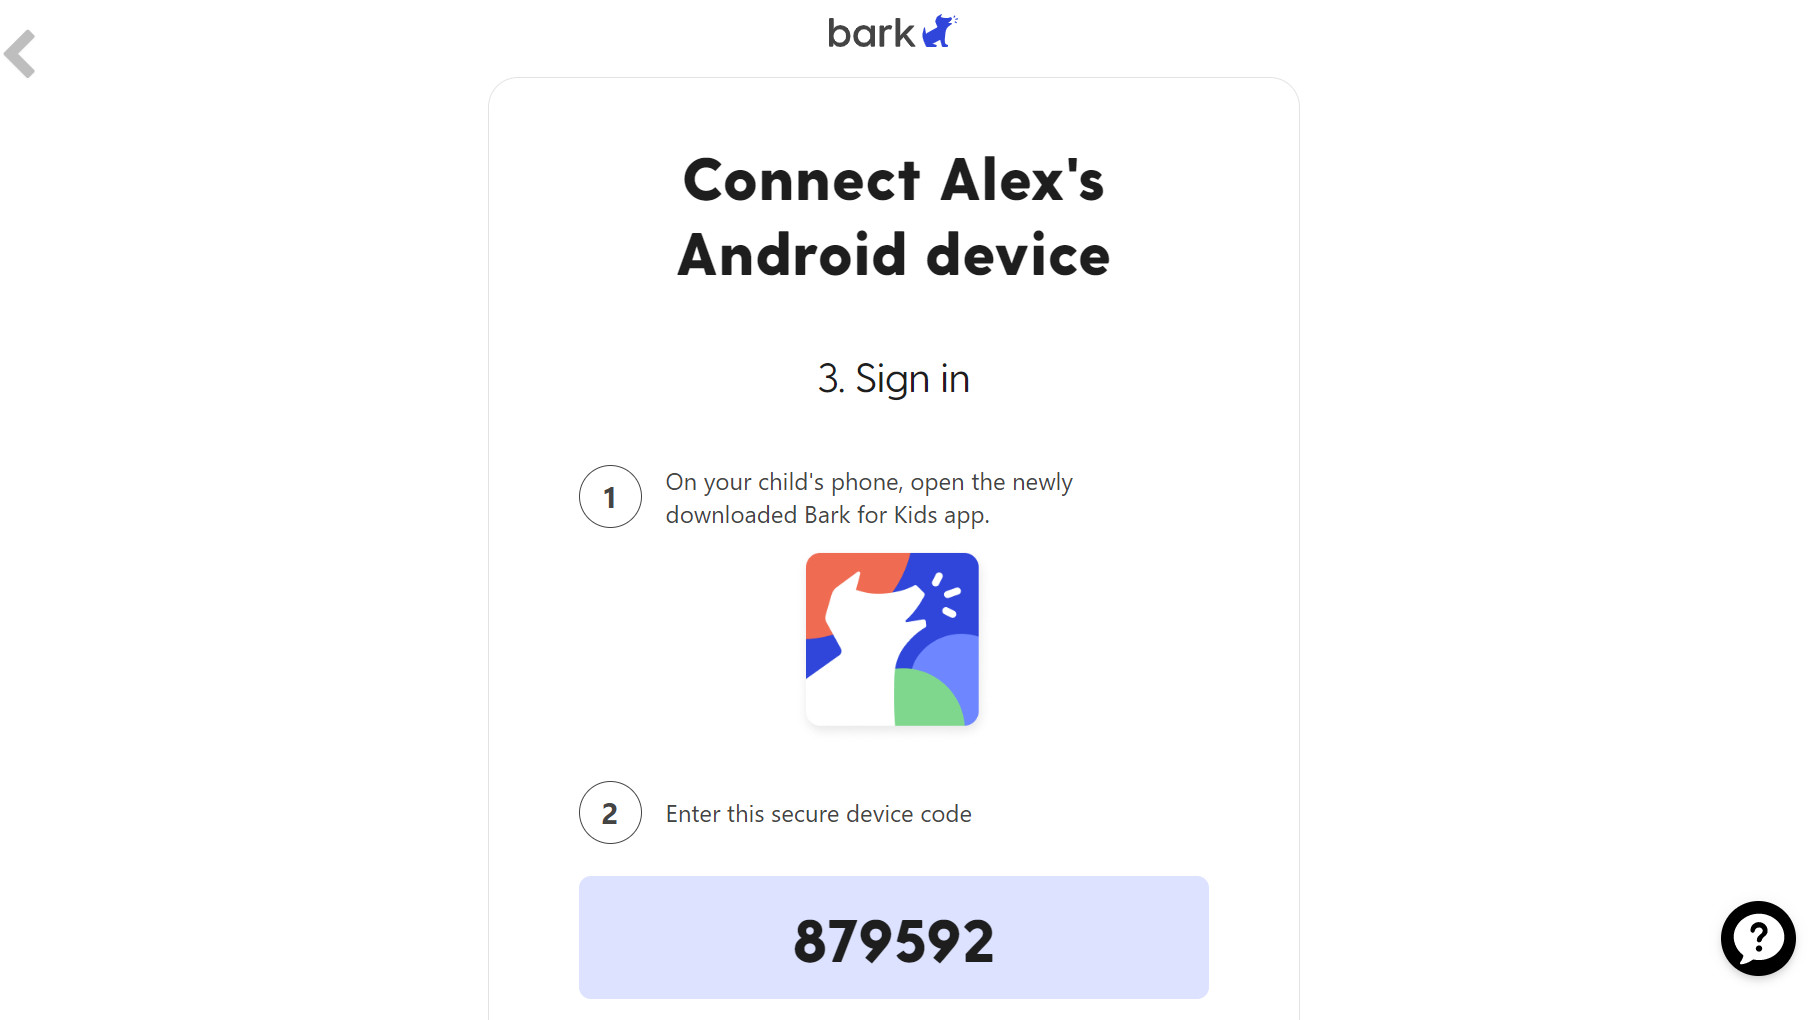 Screenshot of Bark account providing device code for parental controls on Android phone